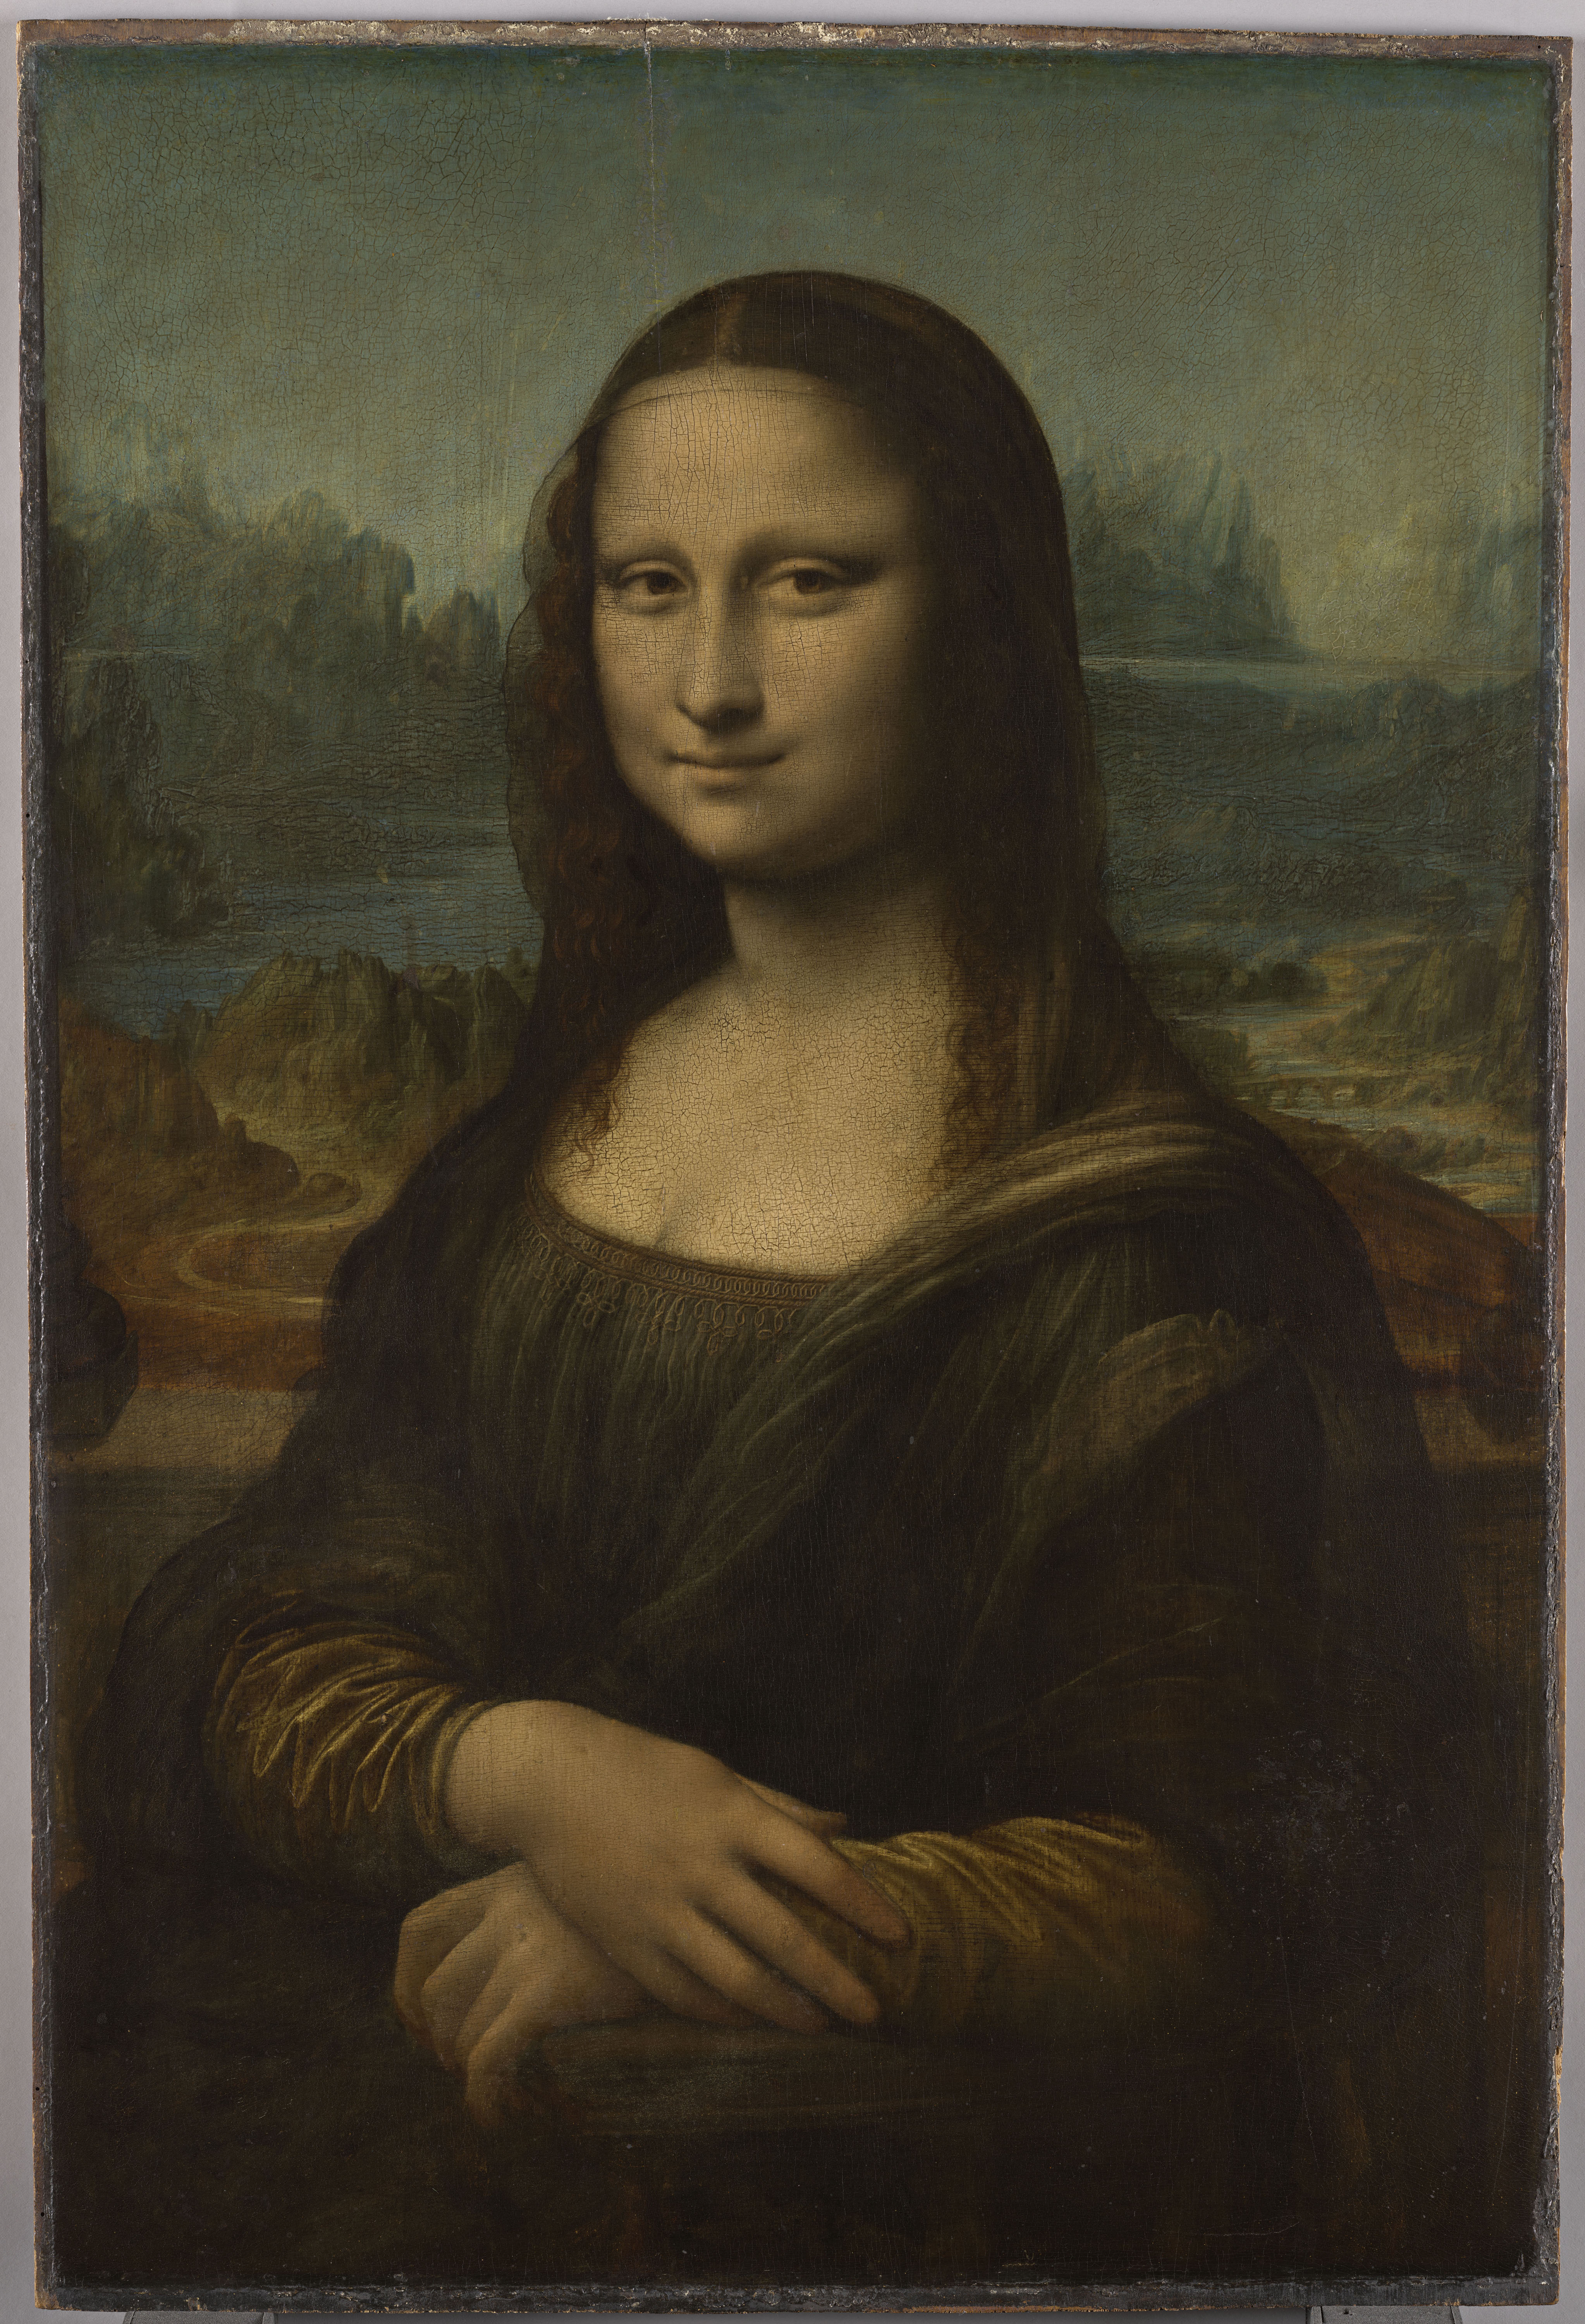 Why is Mona Lisa not sold?